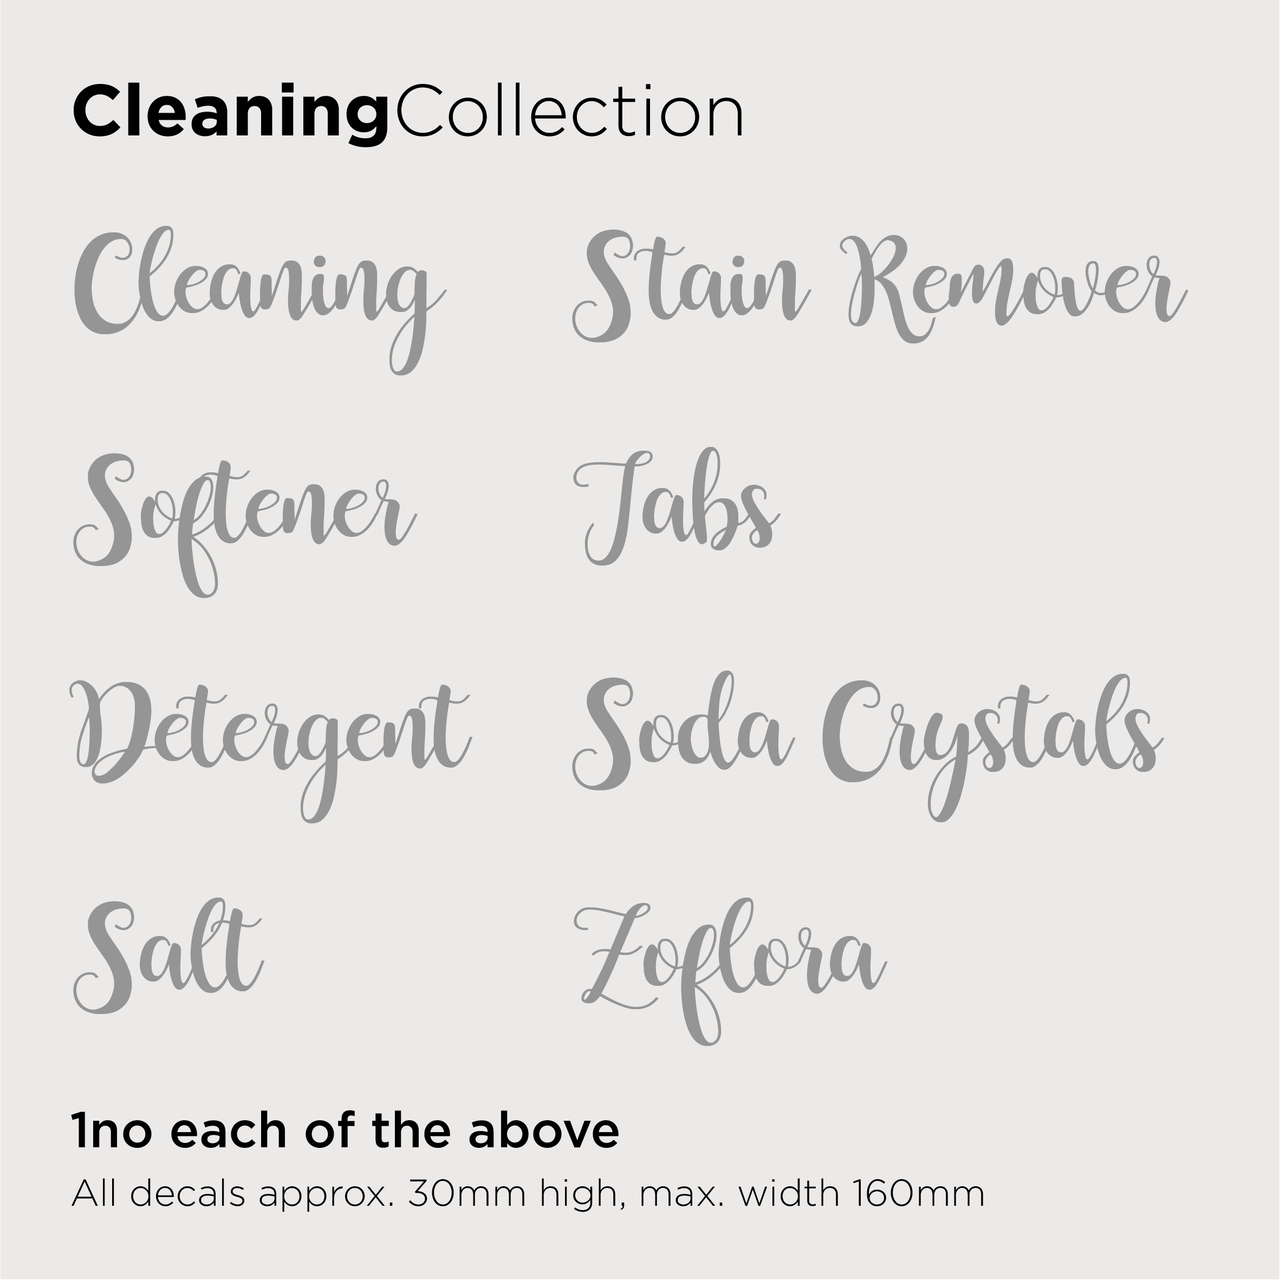 Cleaning Collection Decals